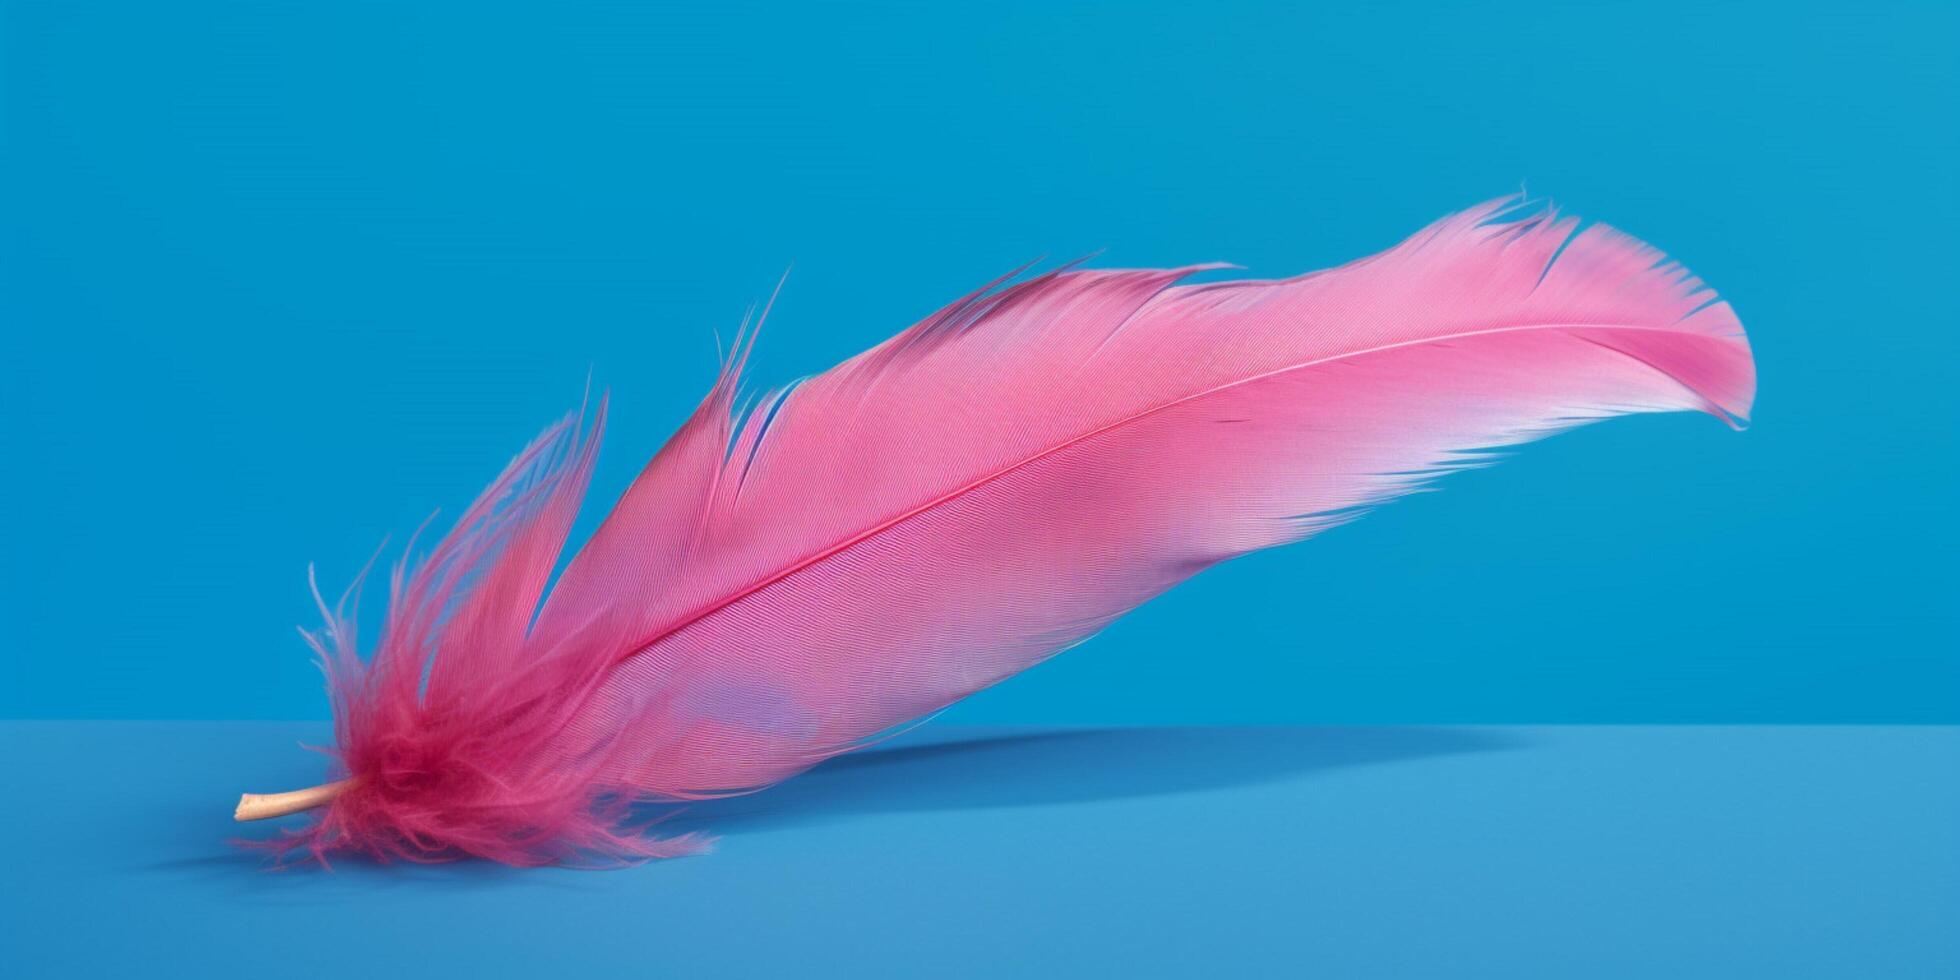 Pink feather is shown in blue background photo